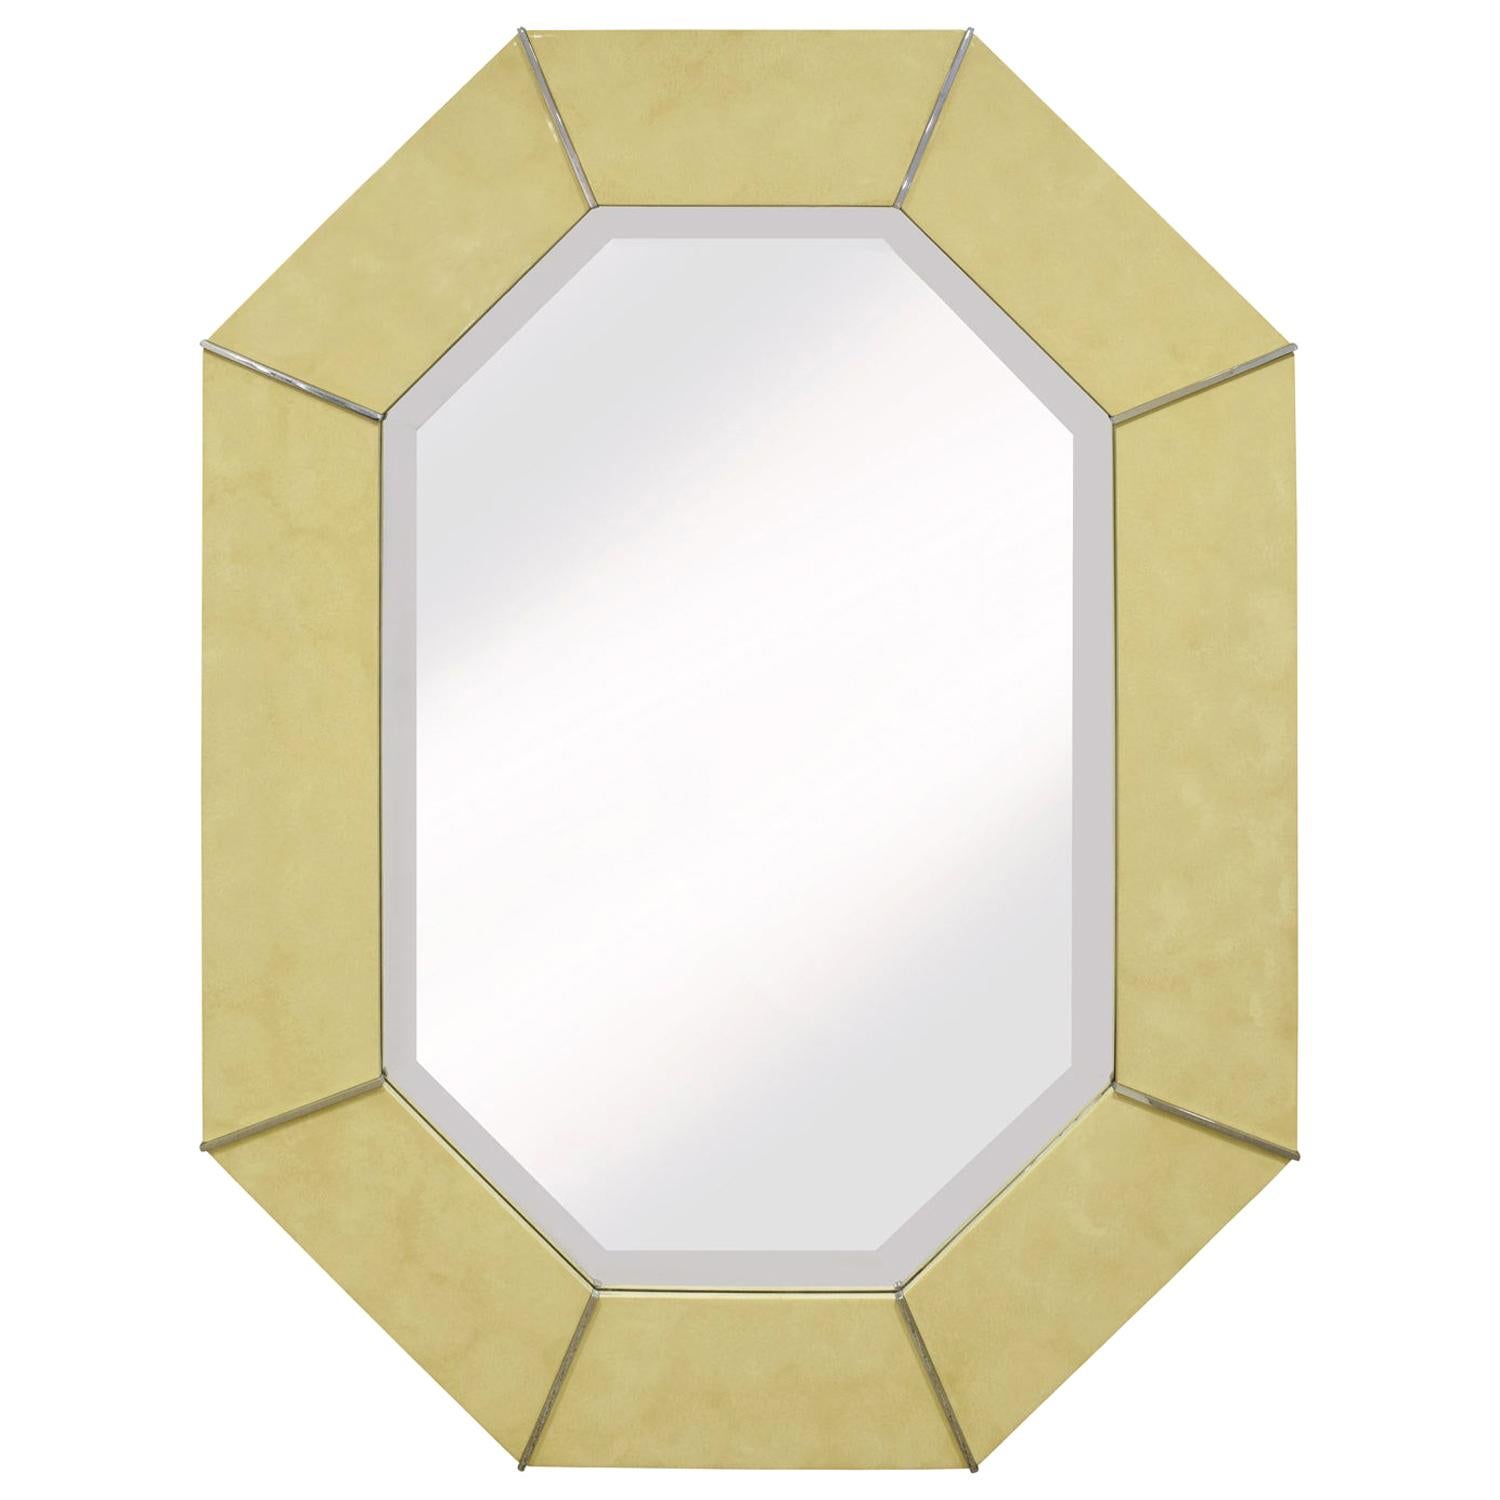 Karl Springer Octagonal Mirror in Ivory Lacquer with Chrome Accents, 1970s